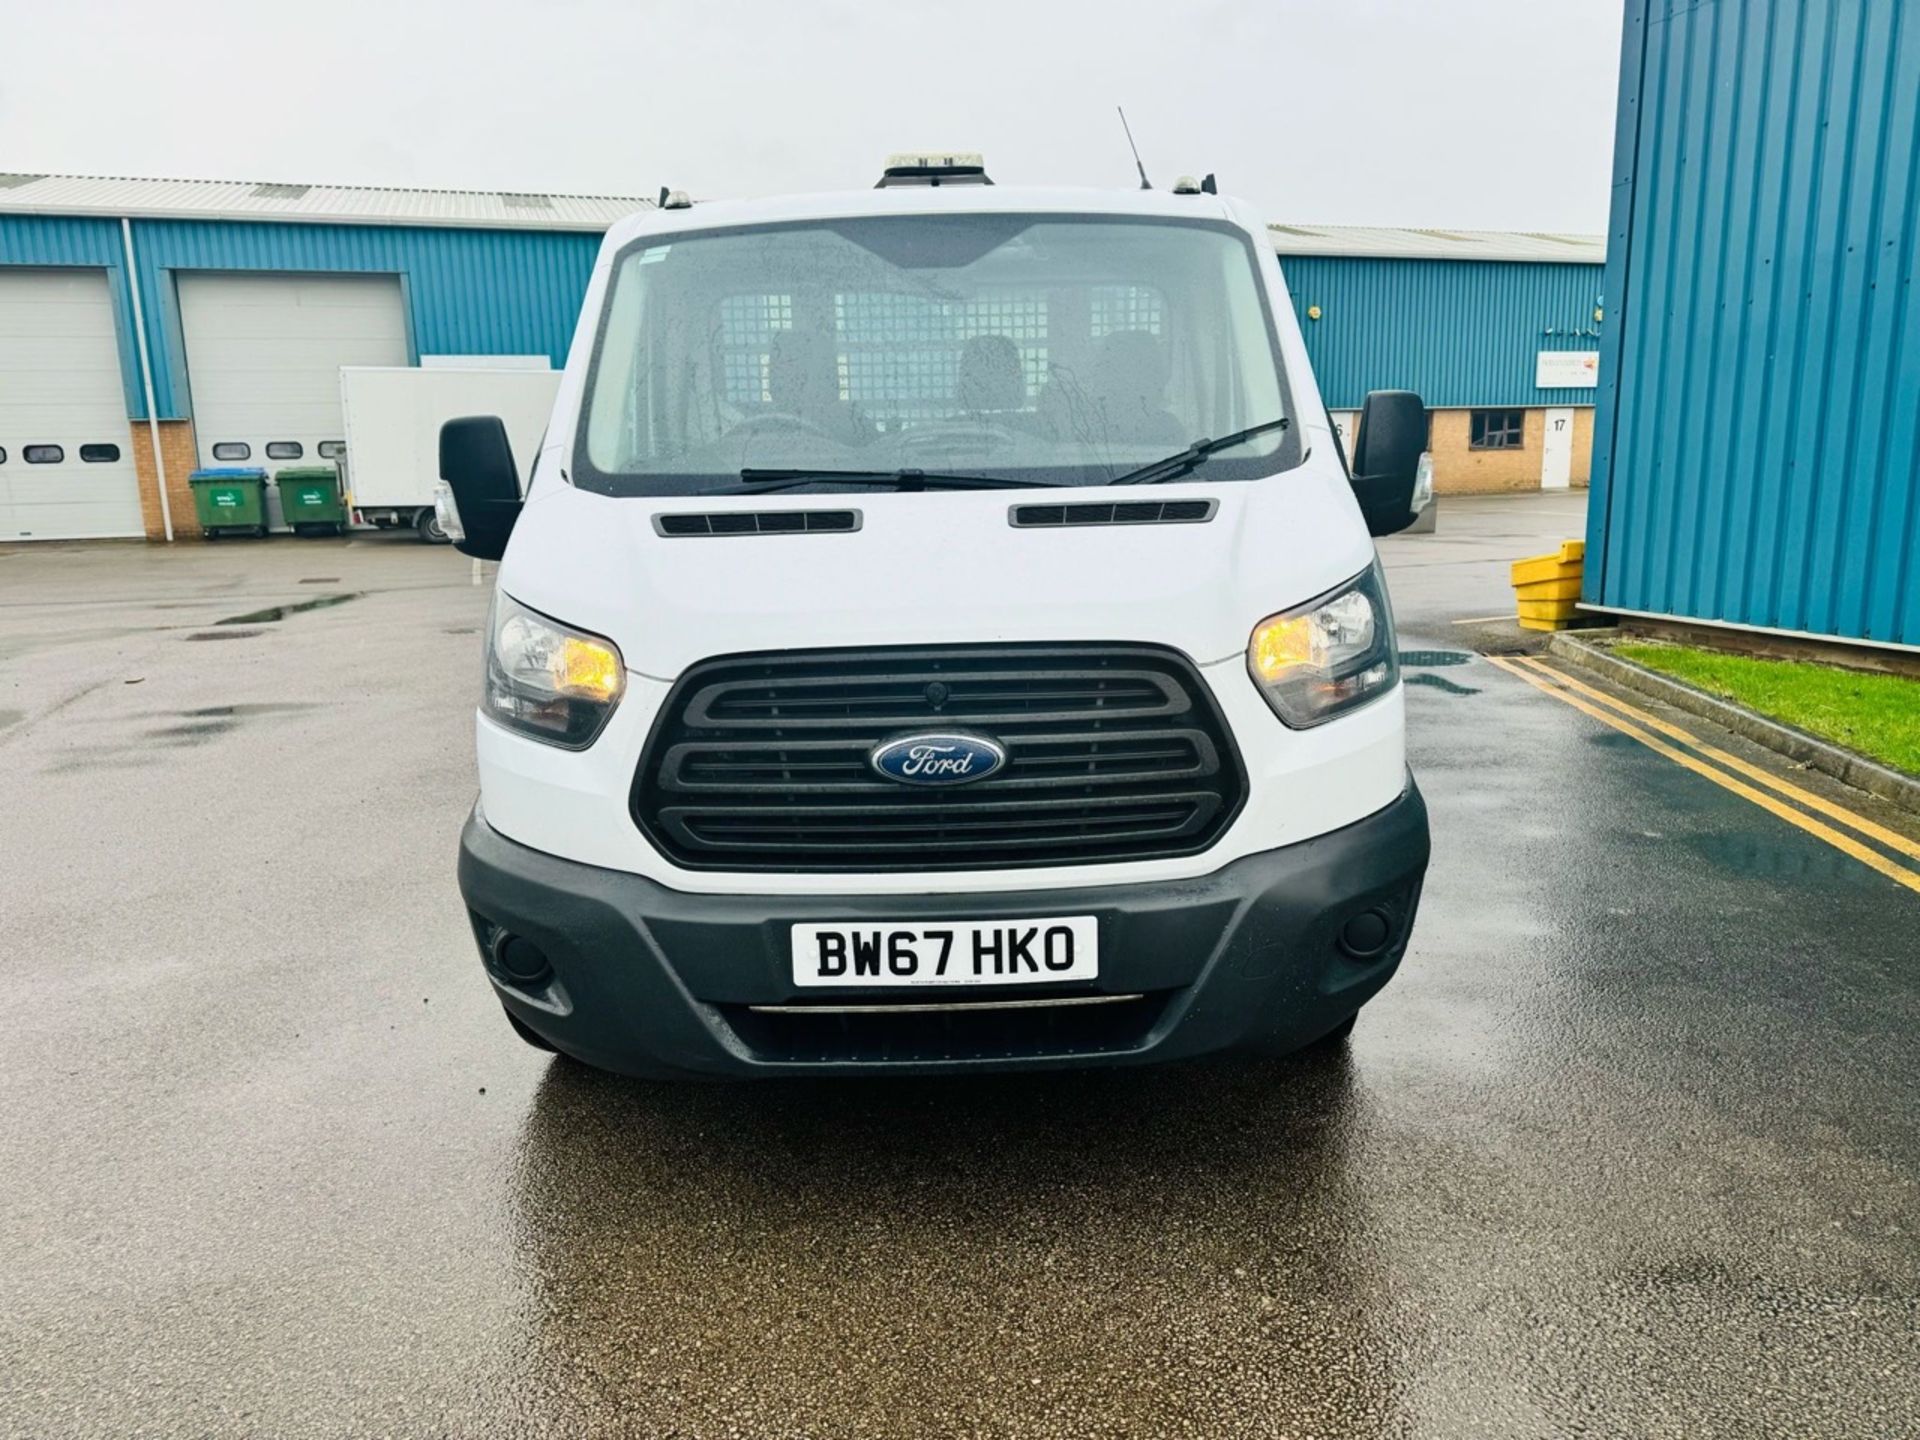 FORD TRANSIT 350 130 2.0TDCI “ ONE STOP TIPPER” -2018 Year - 94k miles Only - Service History Print - Image 8 of 11